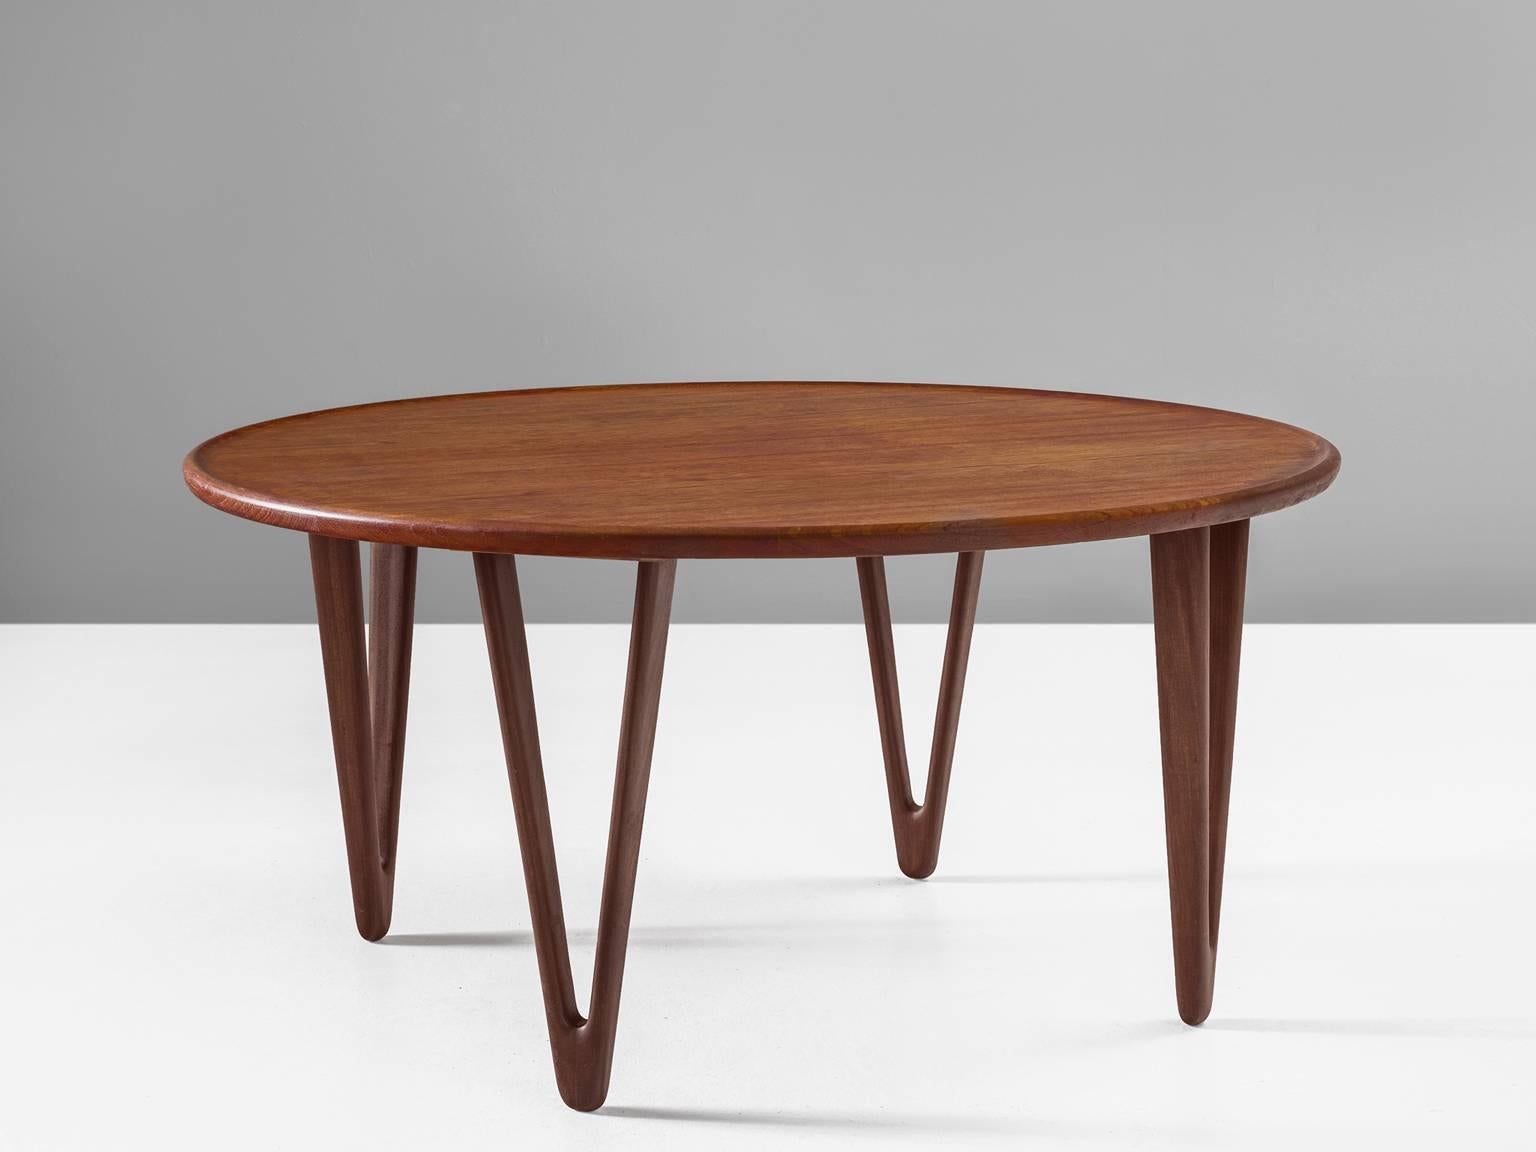 Cocktail table, teak, 1950s, Denmark.

This Danish teak coffee table was designed by Tove Kindt-Larsen (1906-1994) and her husband Edvard Kindt-Larsen (1901-1982) during the 1950s. The table features four hollow triangular teak legs taper towards